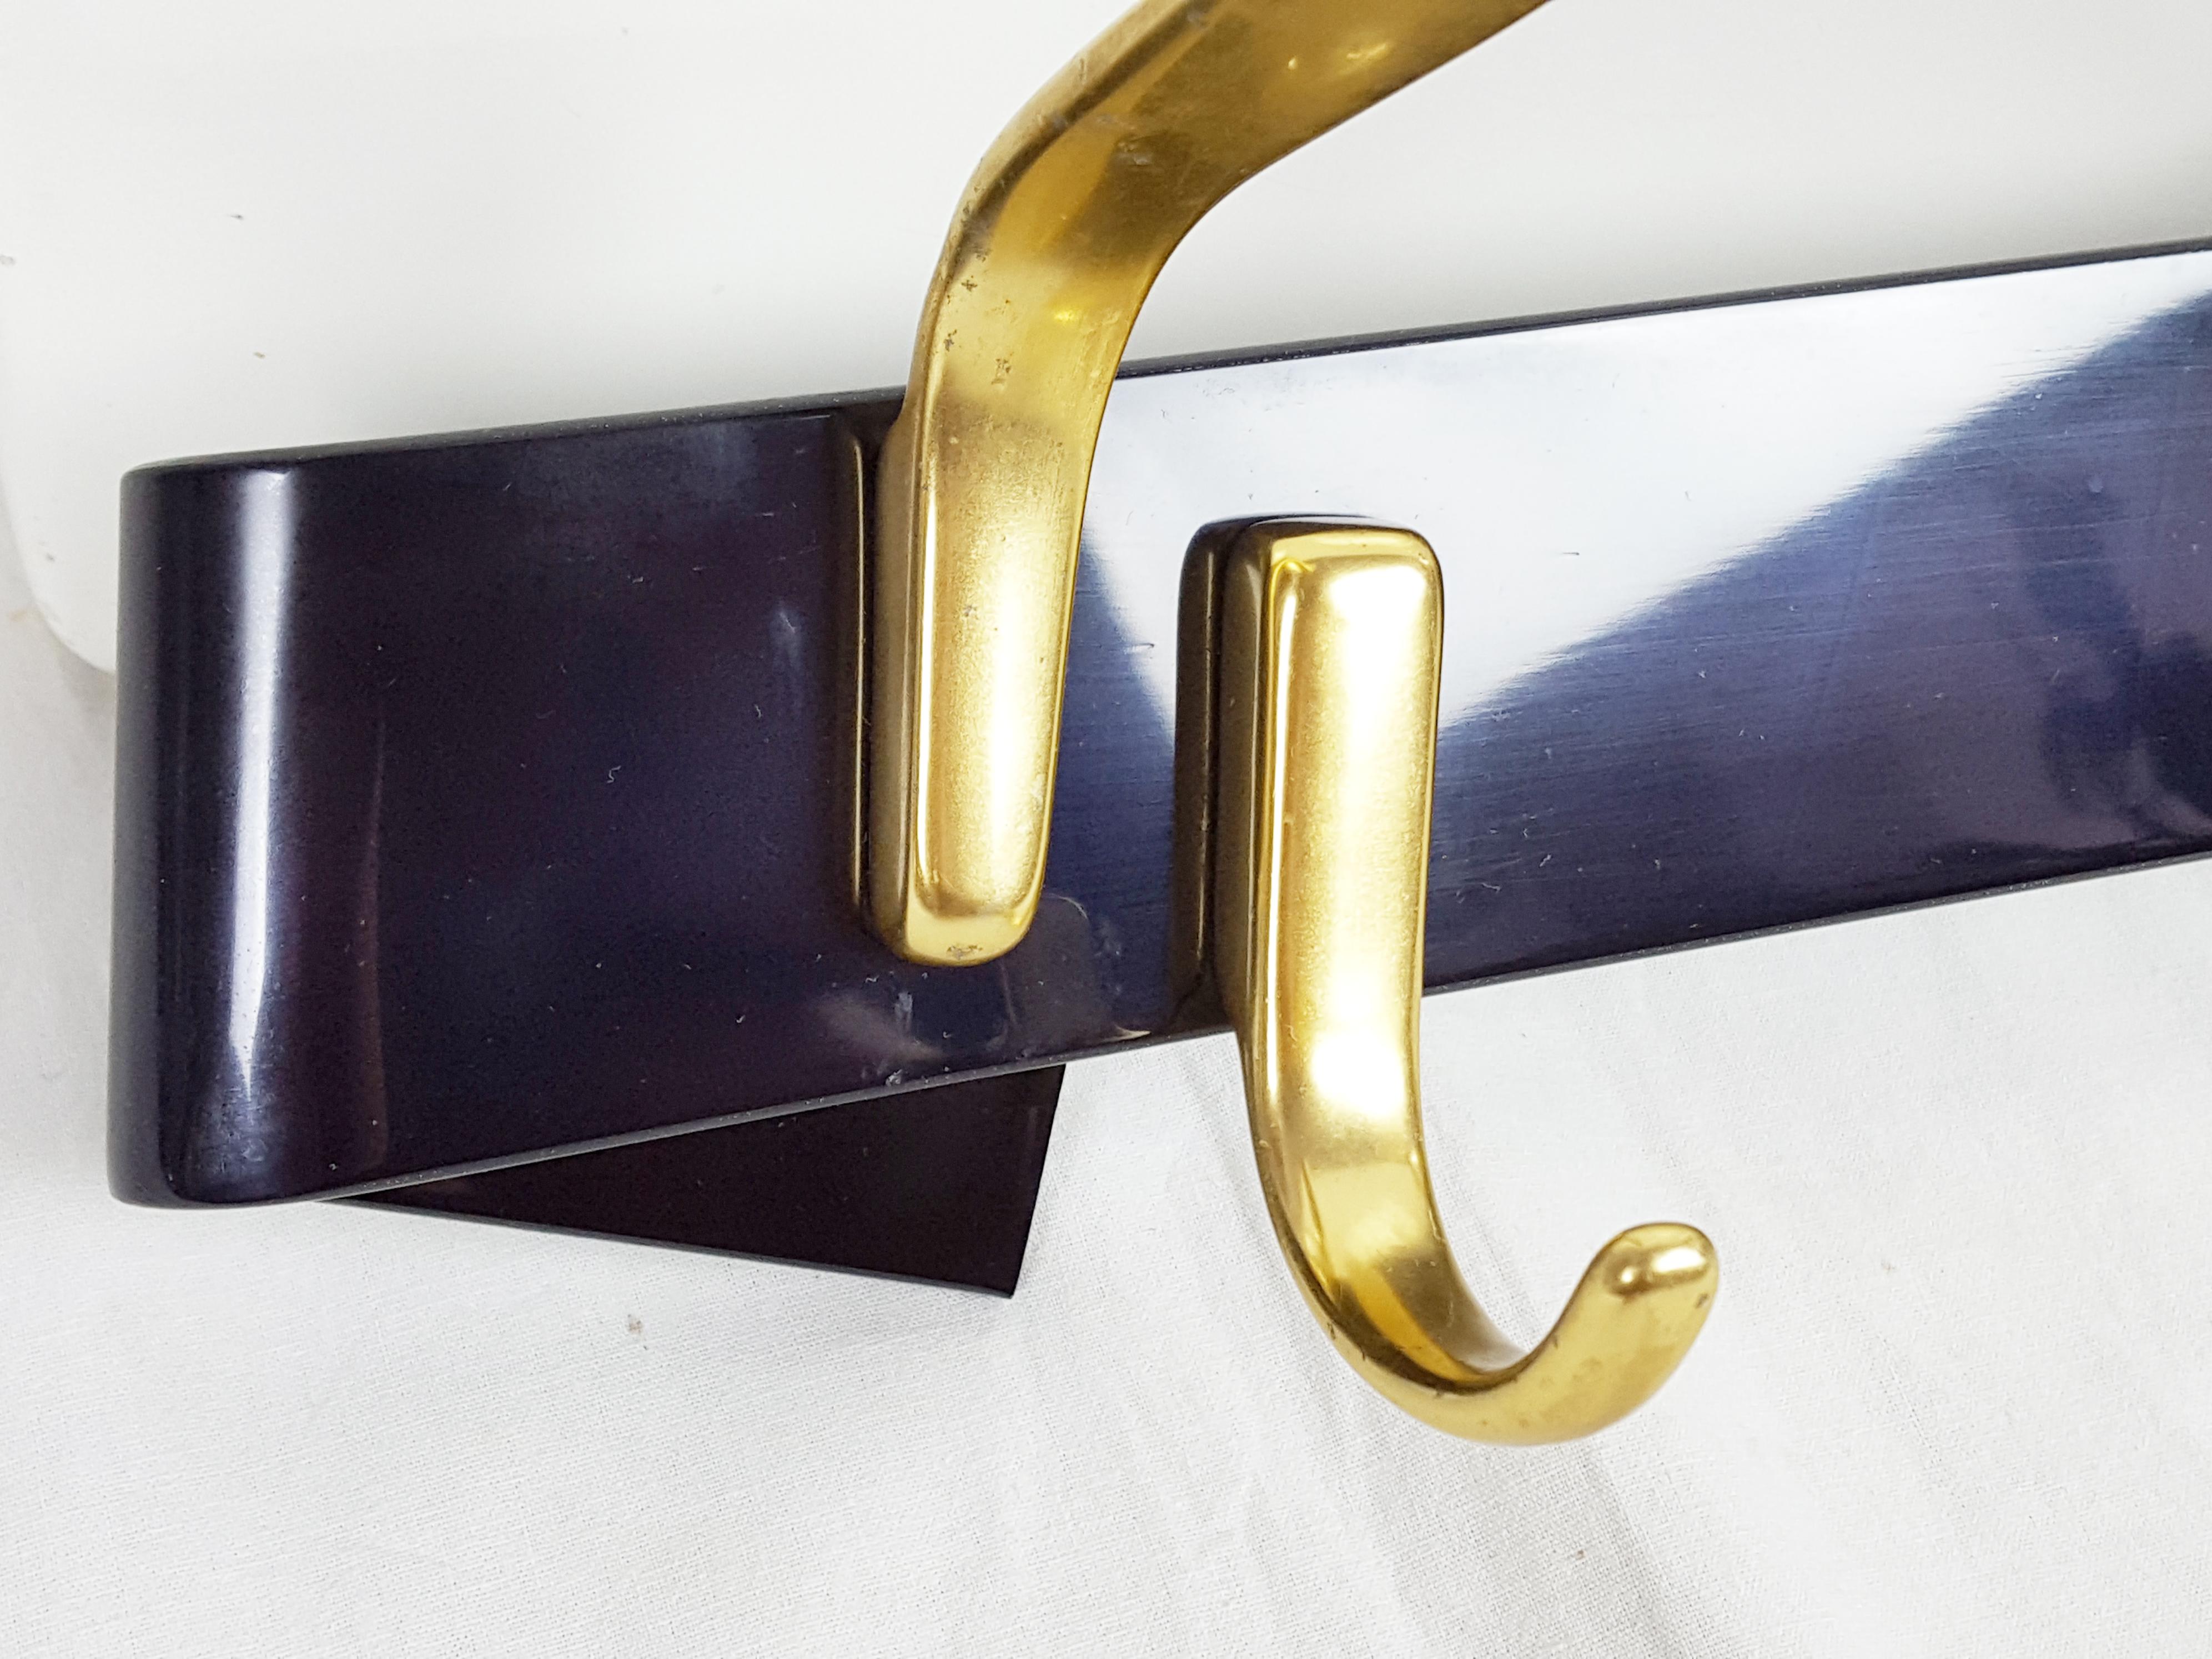 Black Painted Metal & Golden Anodized Aluminum 1950s Coat Rack In Good Condition For Sale In Varese, Lombardia